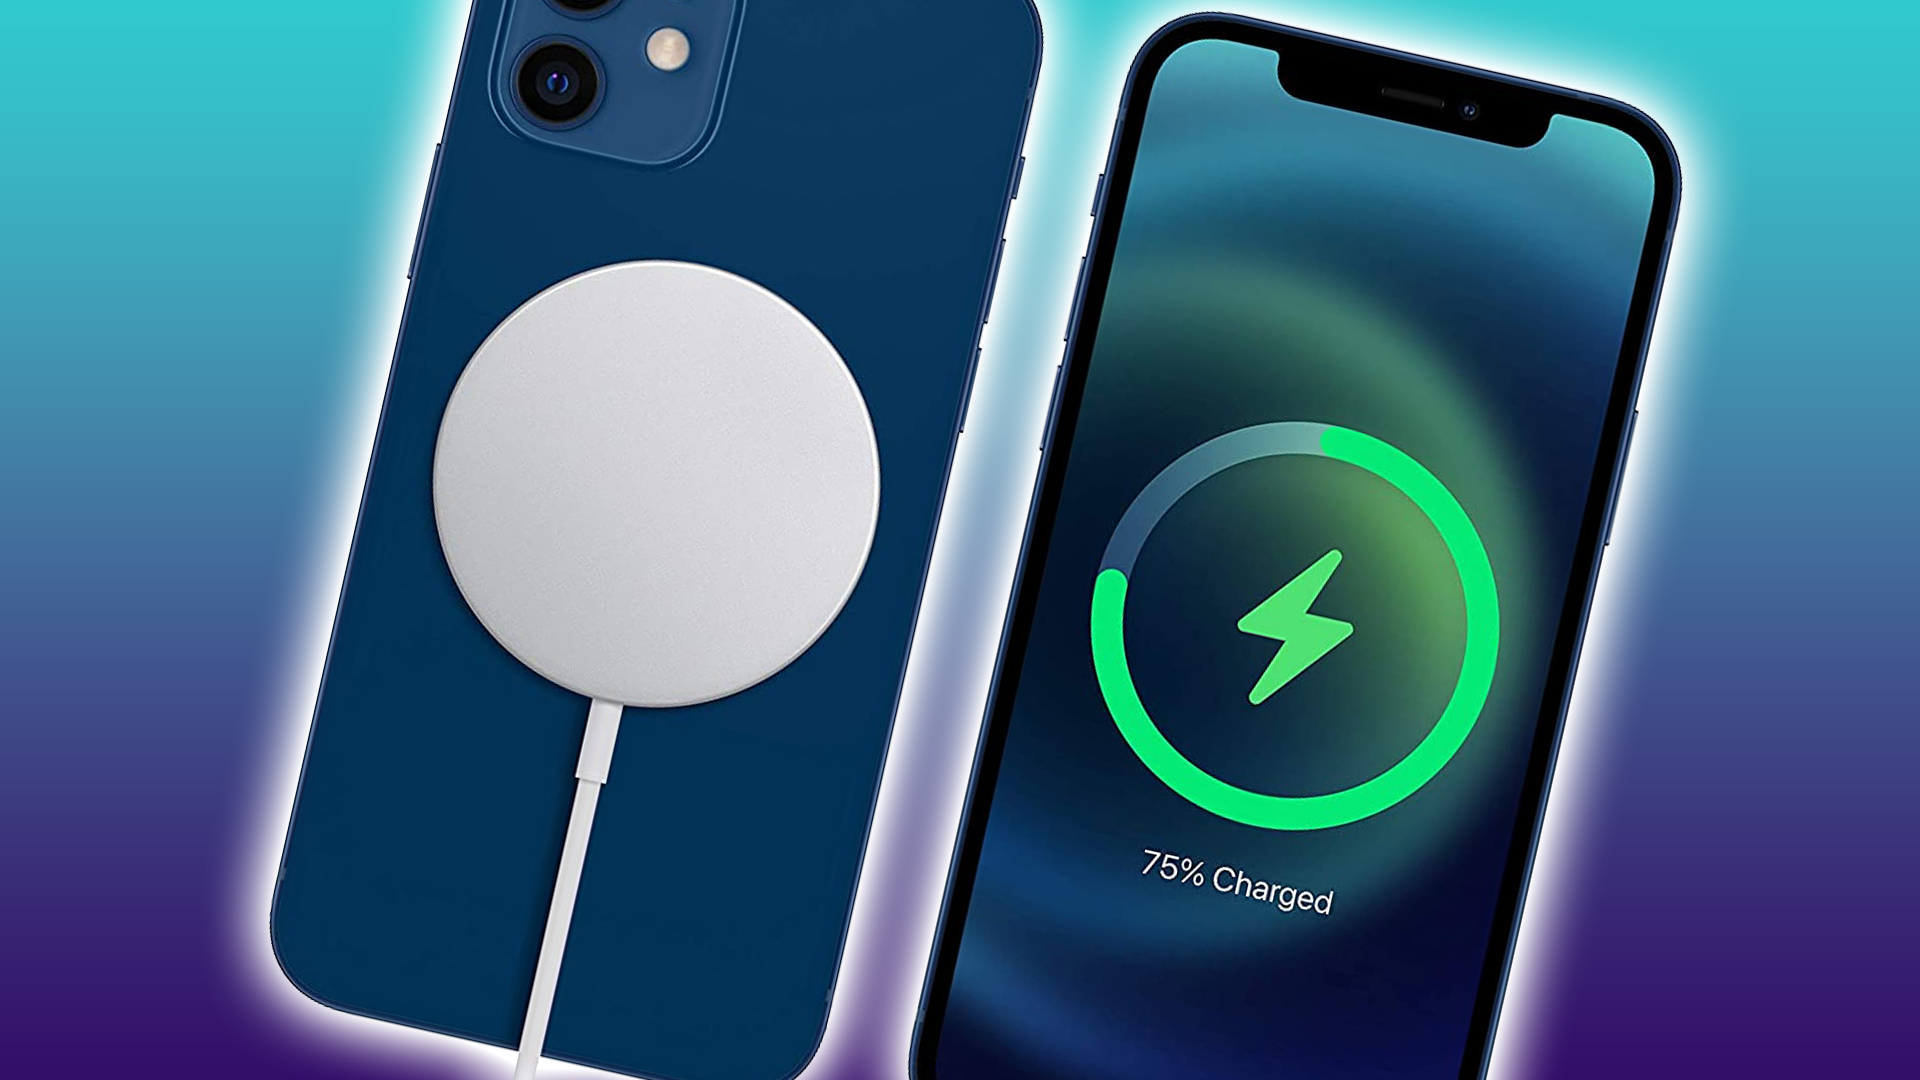 Apple quietly issues surprise upgrade for some iPhones with a secret free battery charging boost – check yours now [Video]